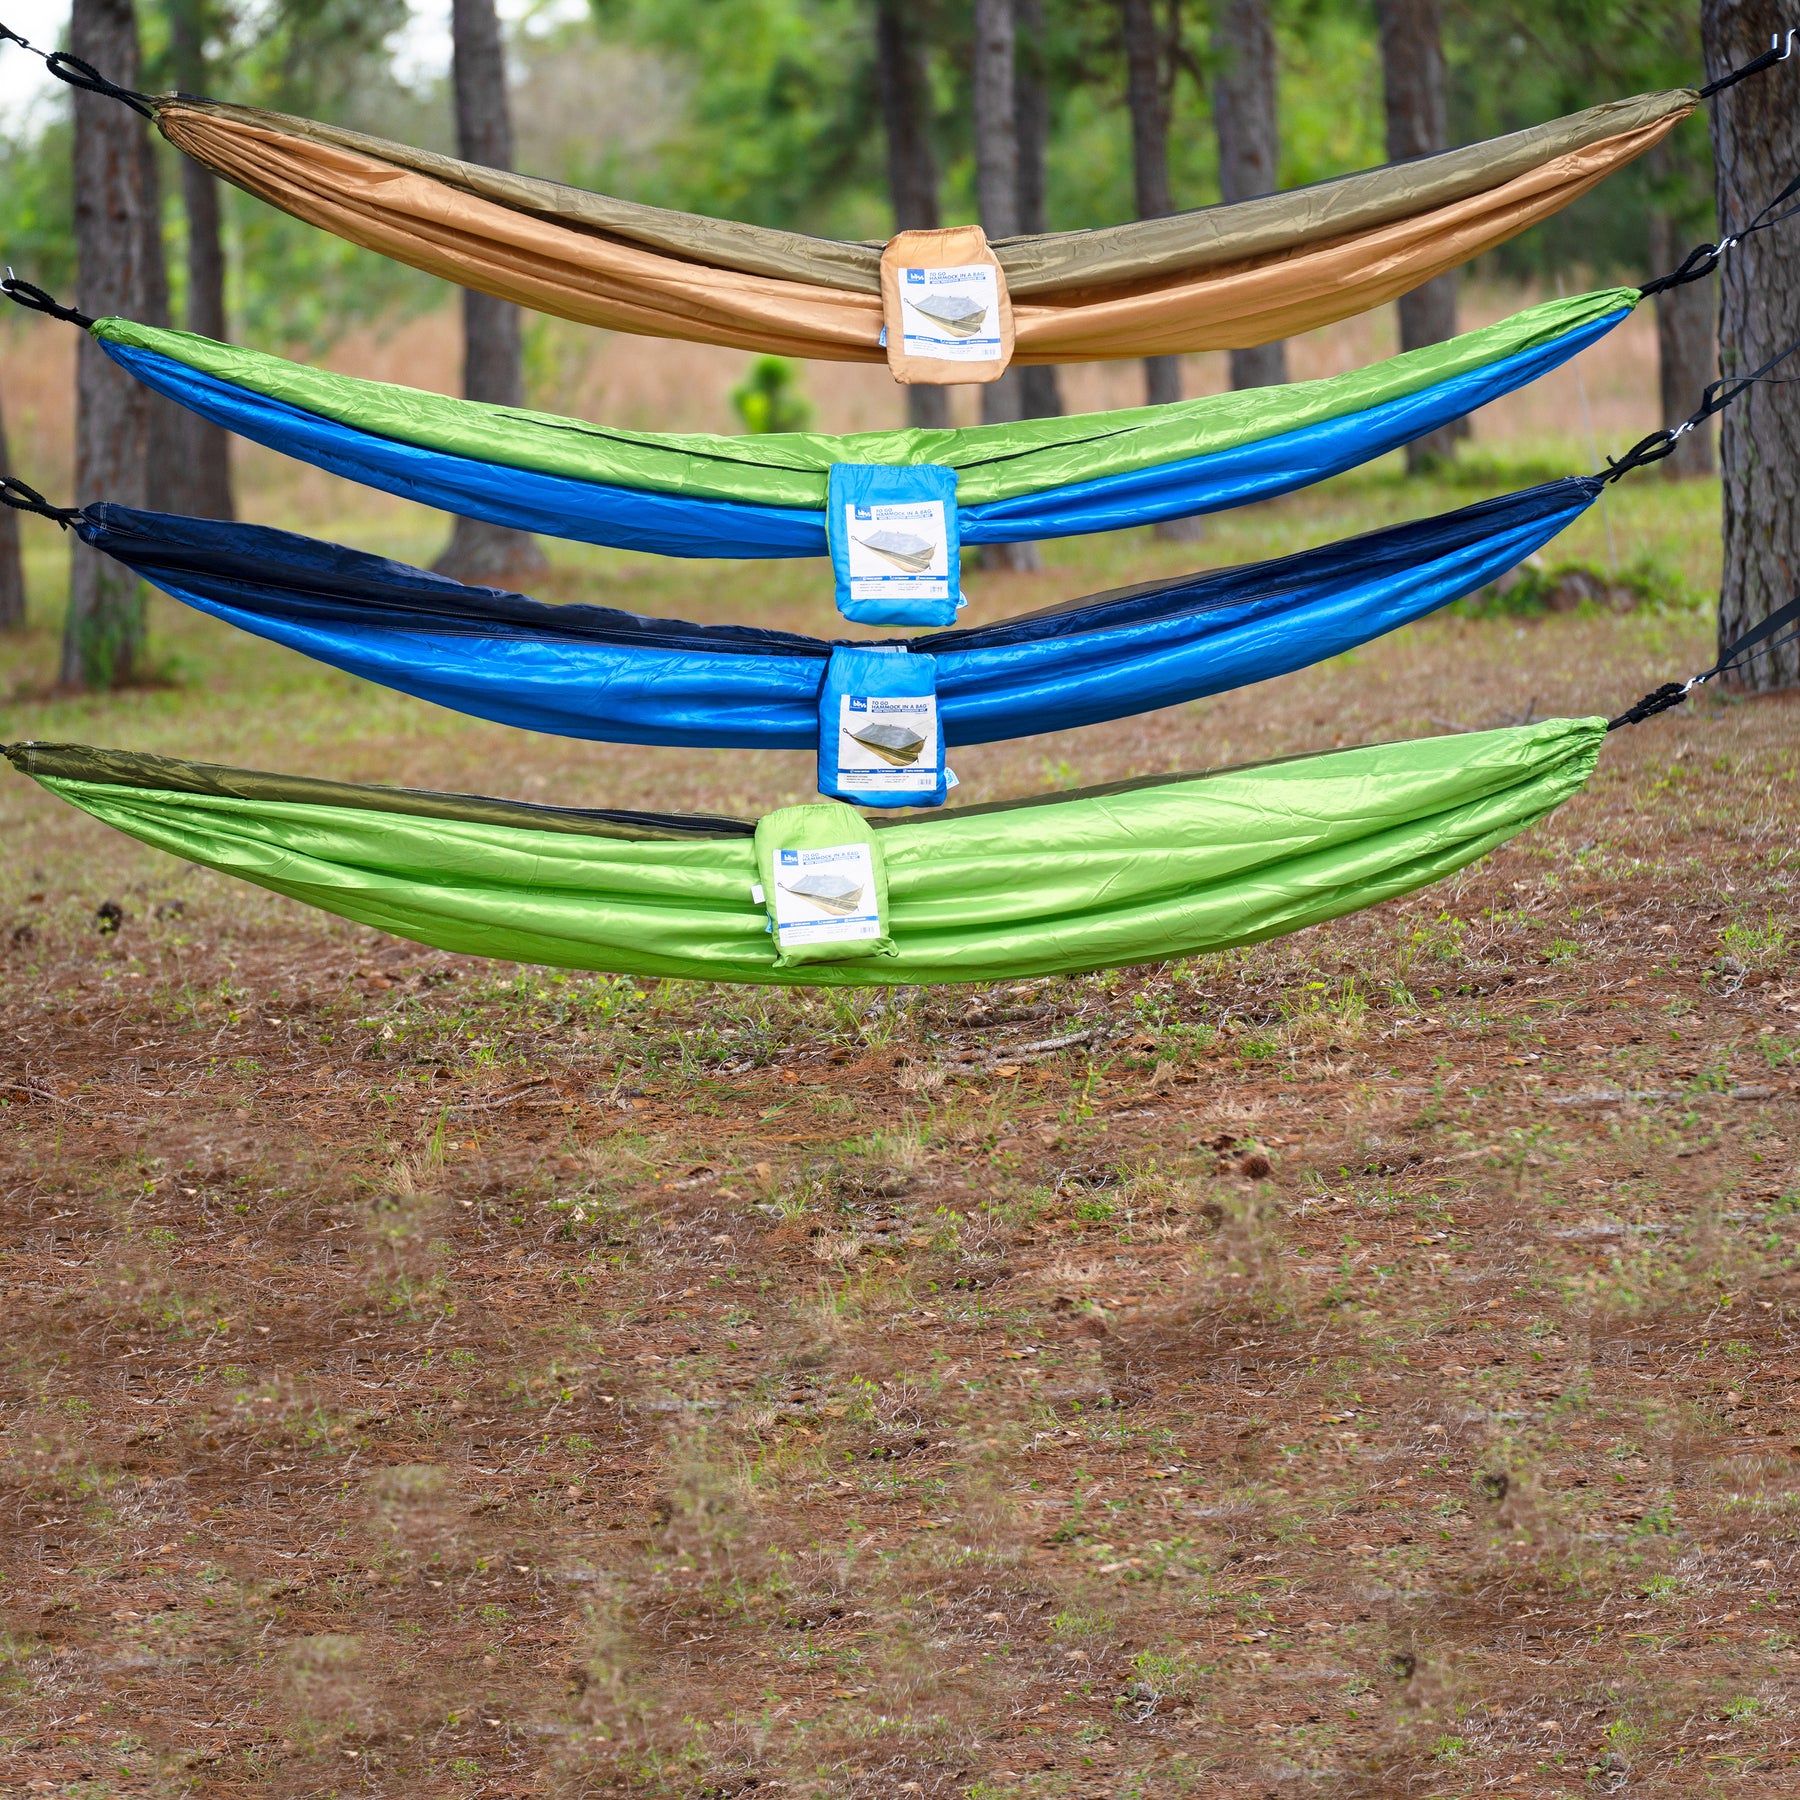 All four hammock variations hung in the woods between two trees.